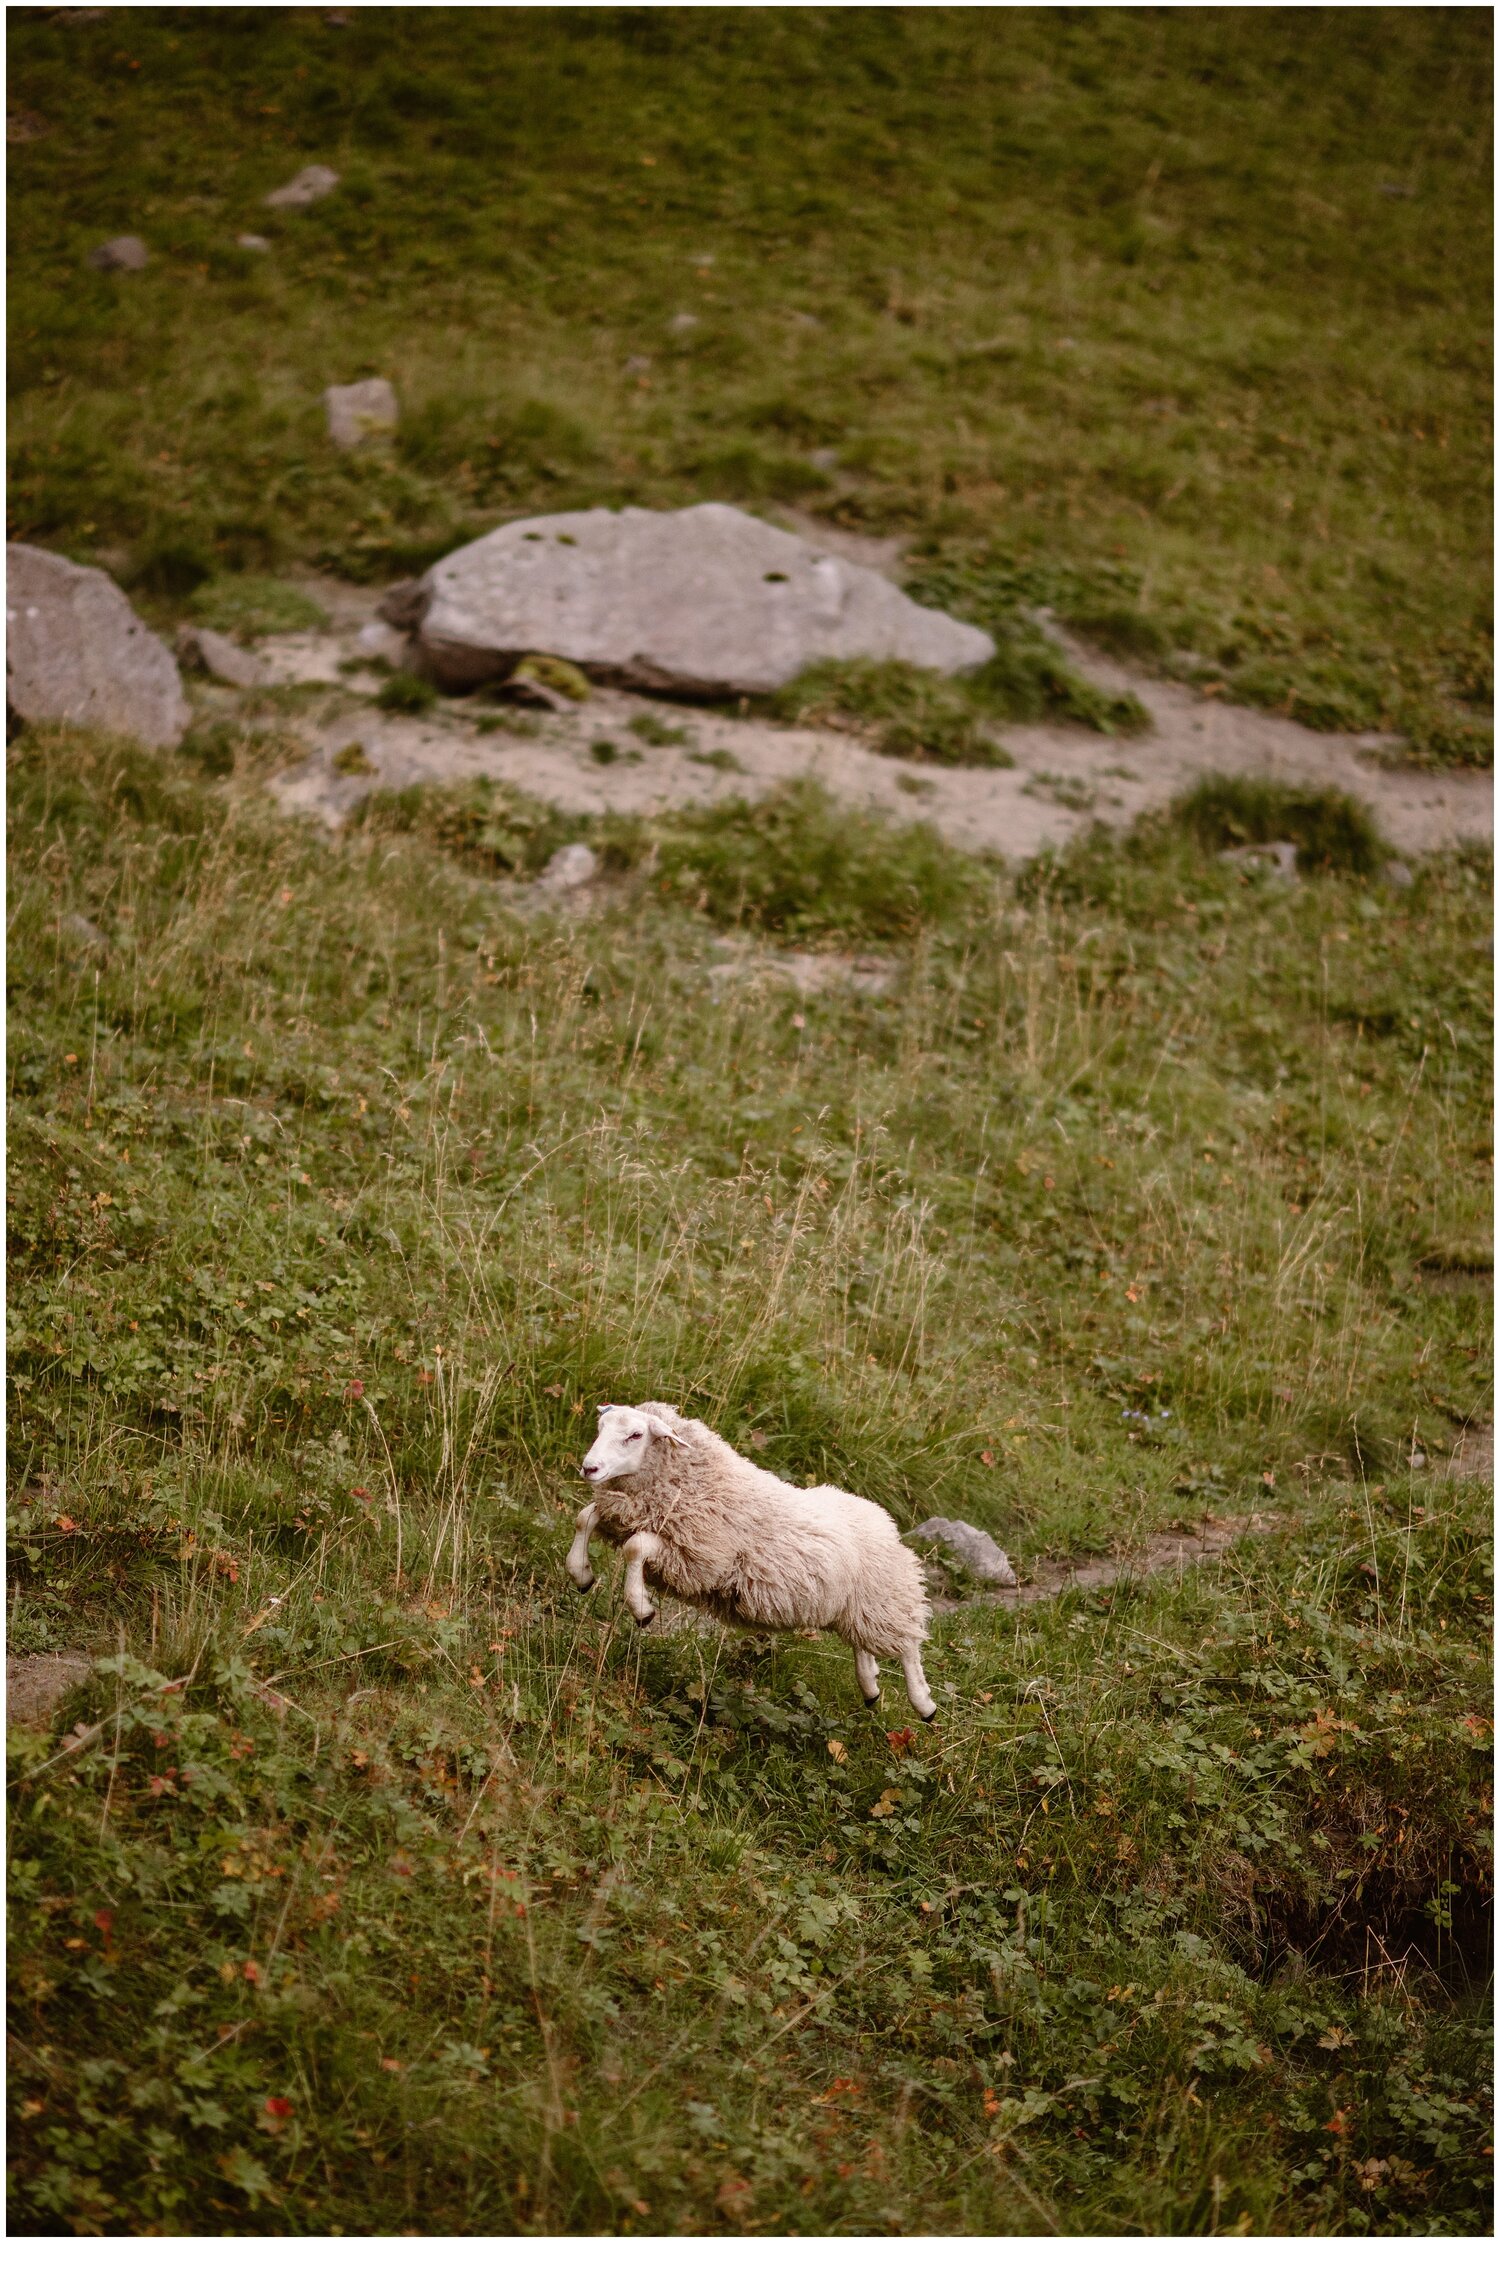 A sheep jumping in Norway.